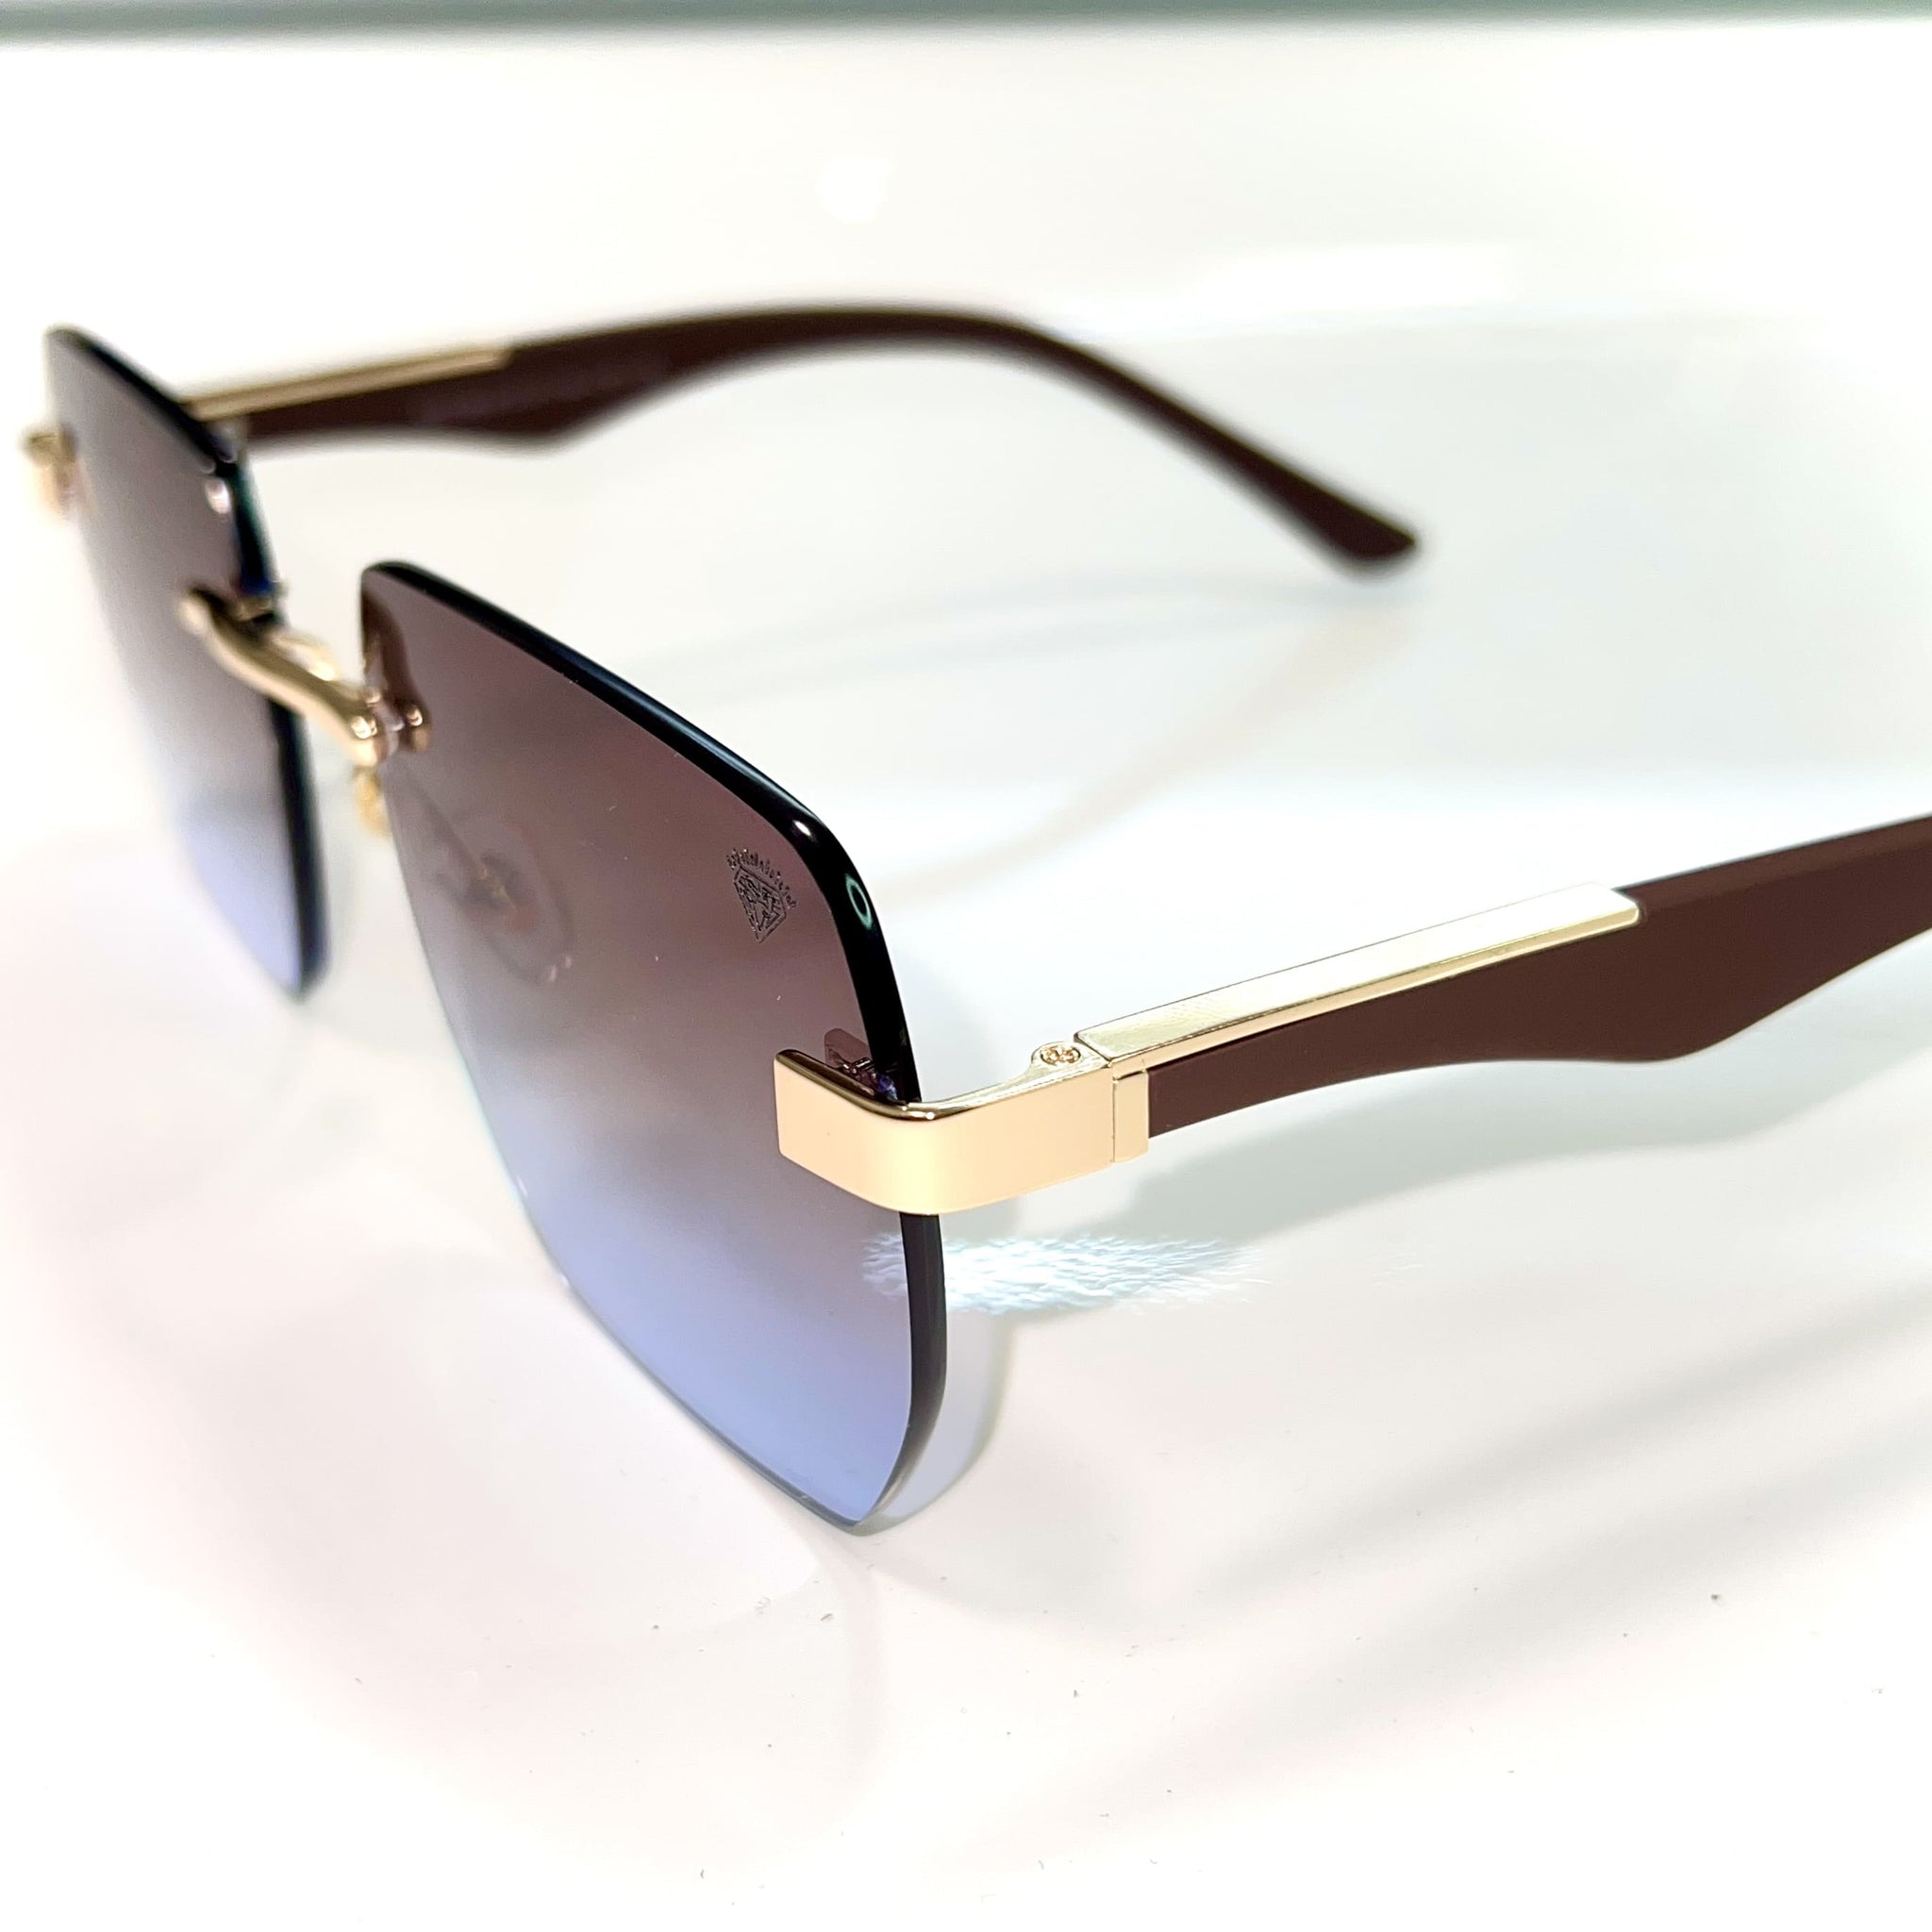 Dubai Glasses - 14 carat gold plated / Silicon side - Brown/Blue Shade - Sehgal Glasses